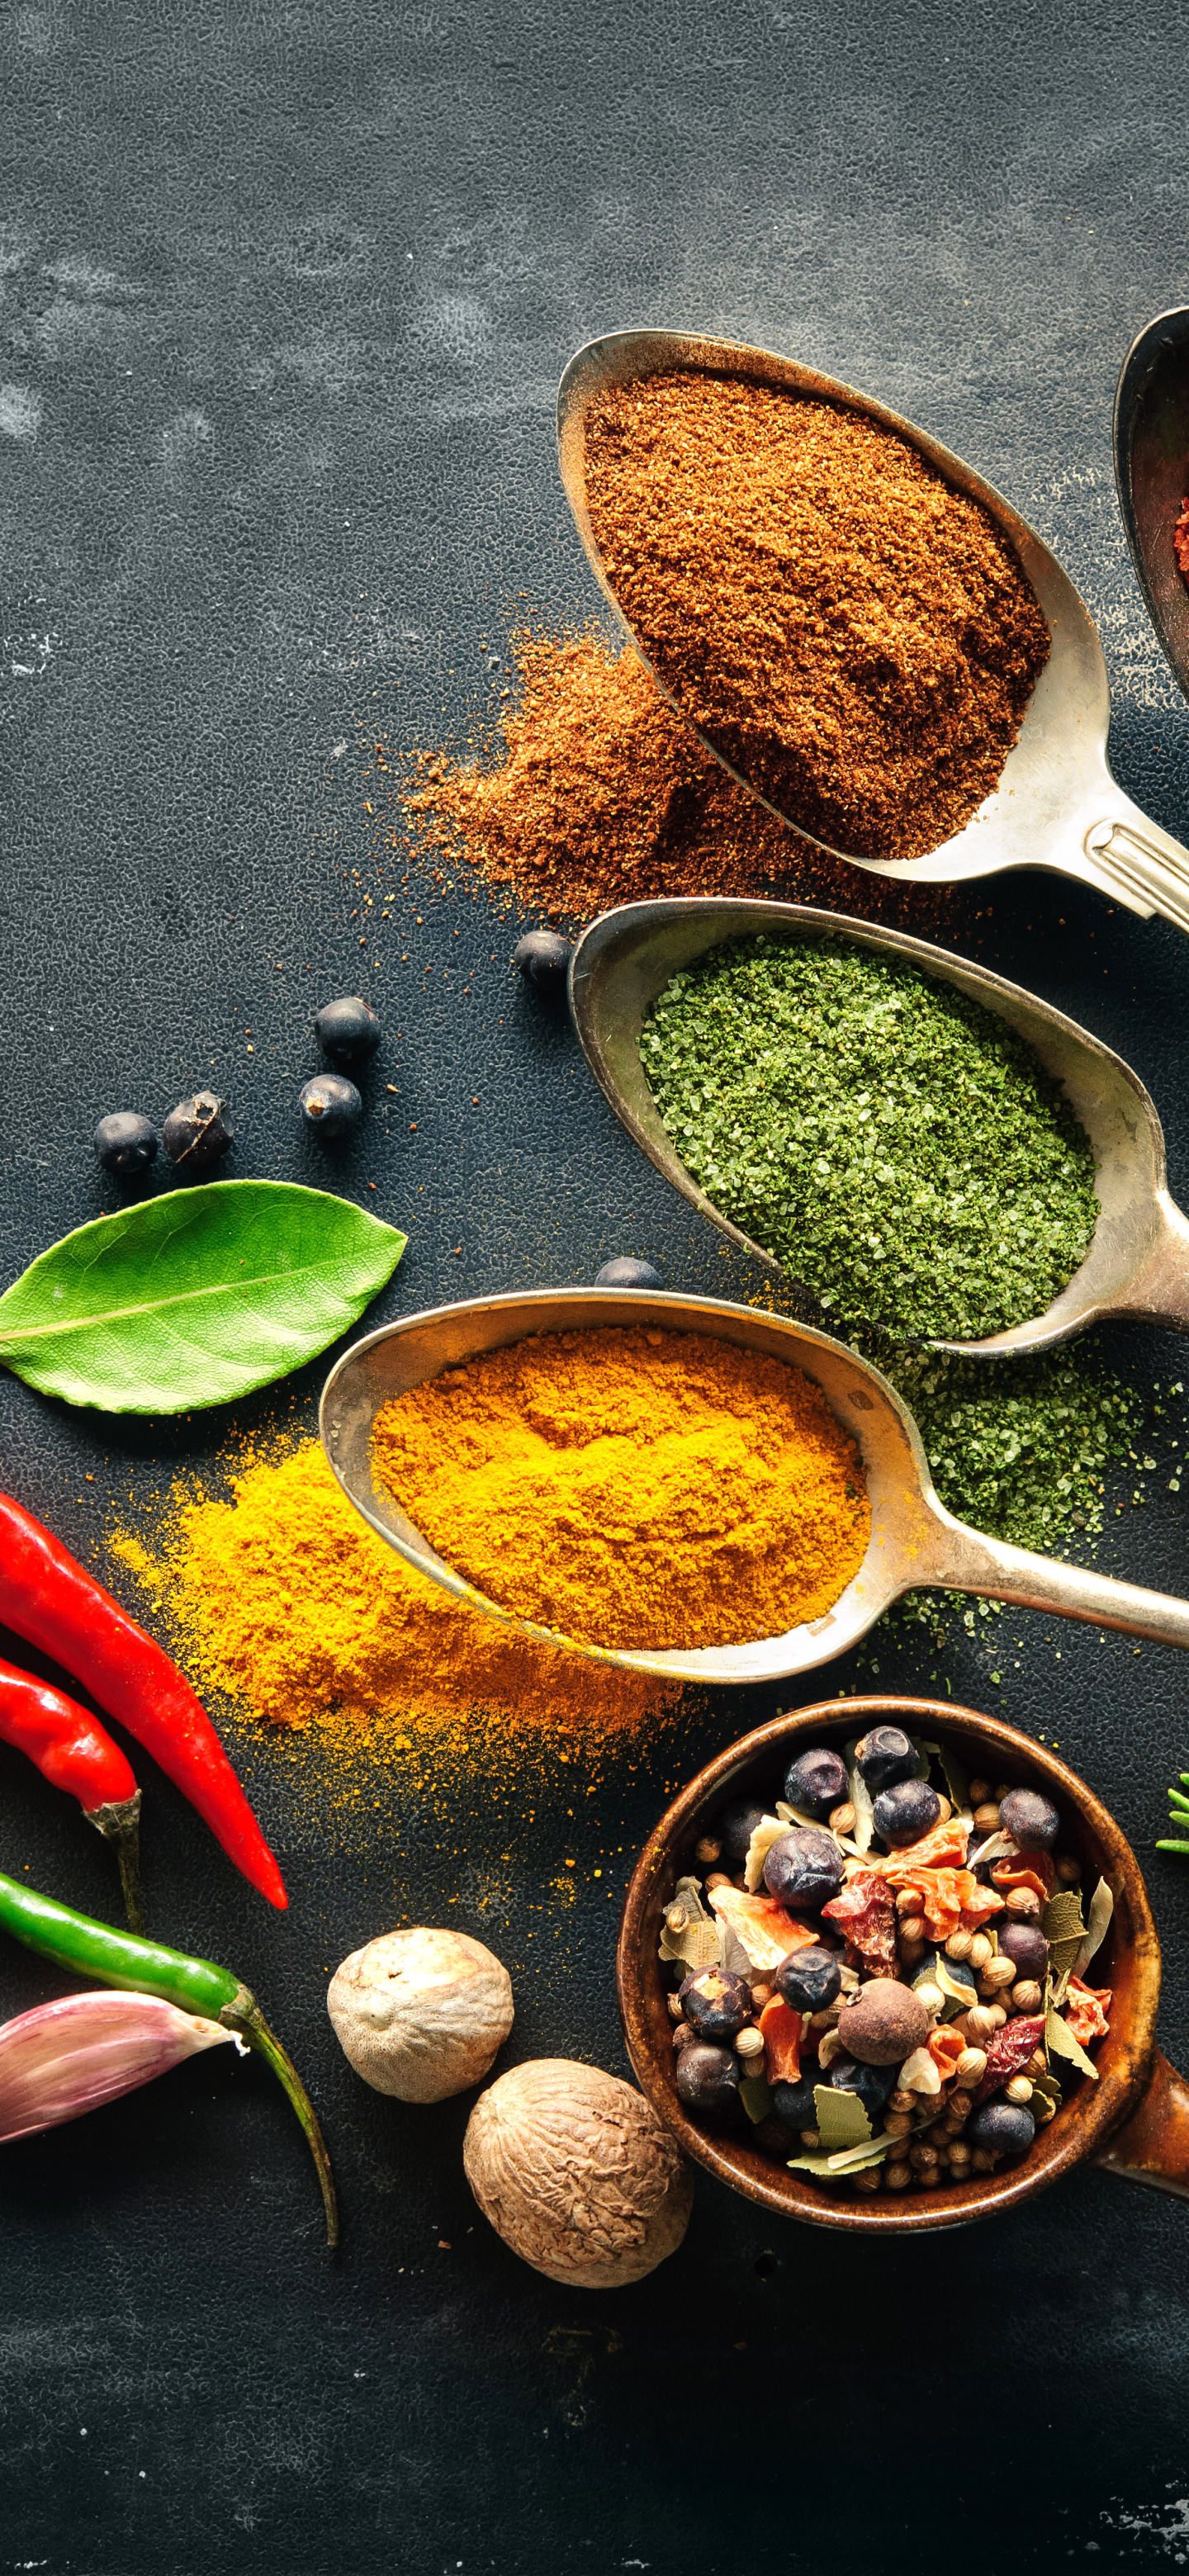 HD wallpaper herbs and spices, herbs, food, spices, pepper, still life